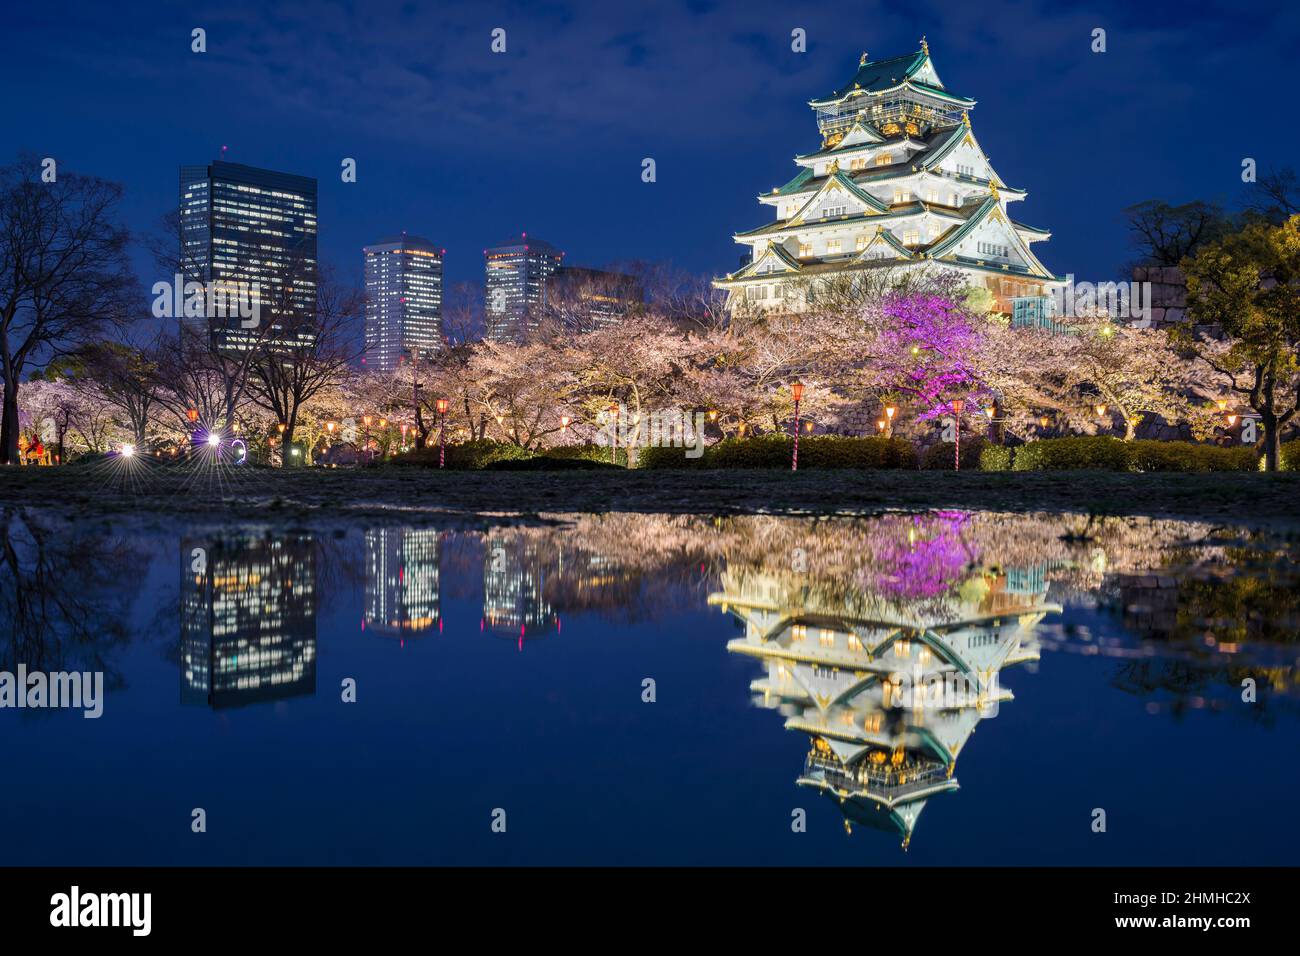 Osaka Castle with cherry trees and modern buildings in the background at night, Japan Stock Photo